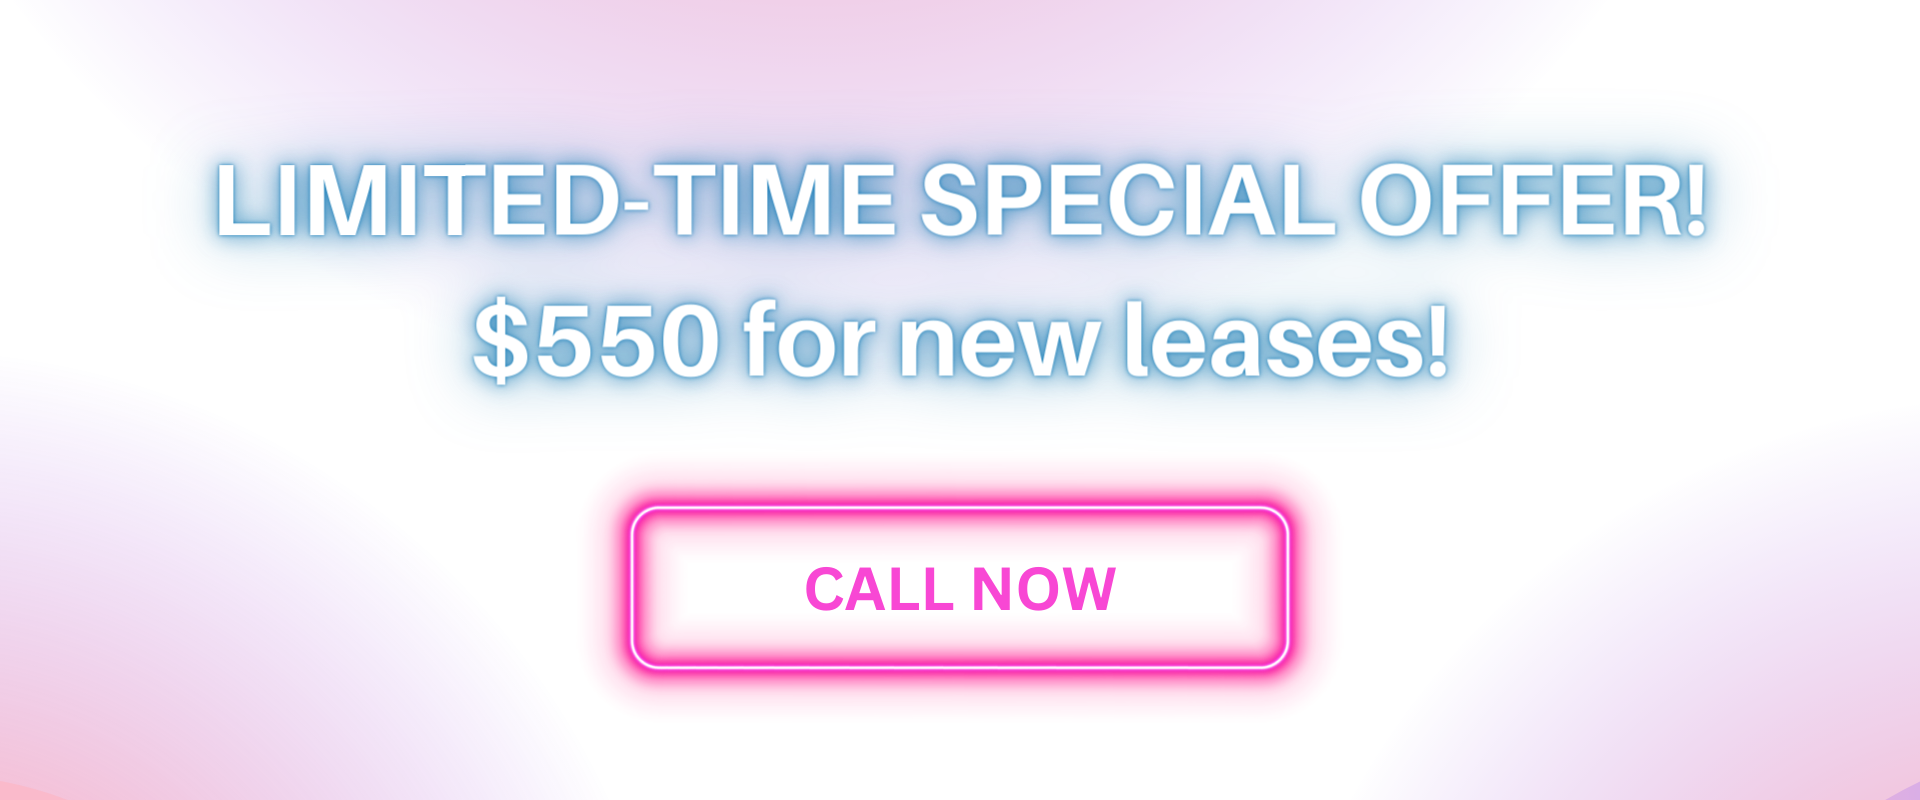 LIMITED-TIME SPECIAL OFFER!
$500 for new leases!